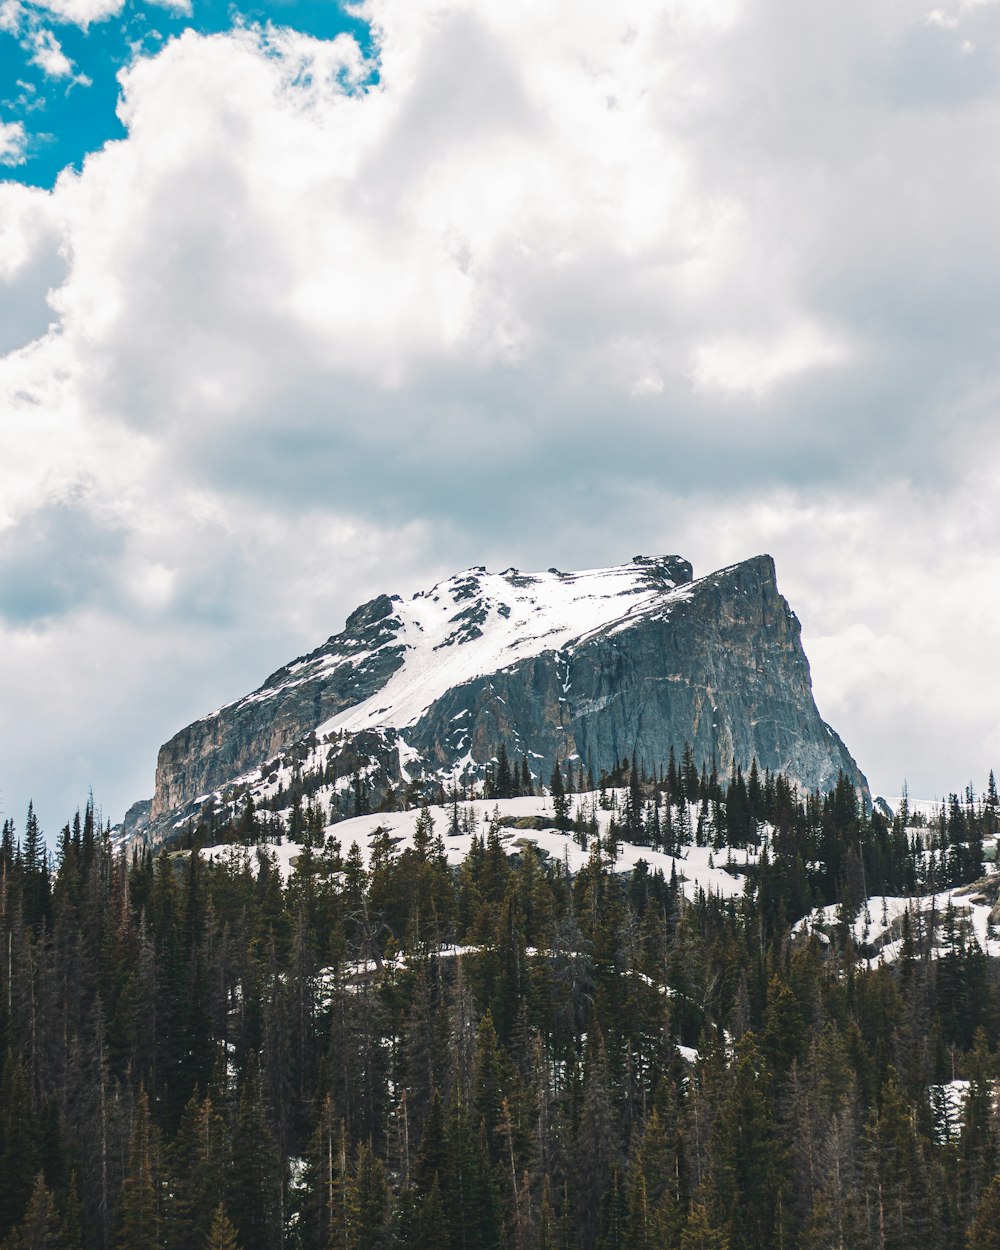 a snow covered mountain surrounded by trees under a cloudy sky